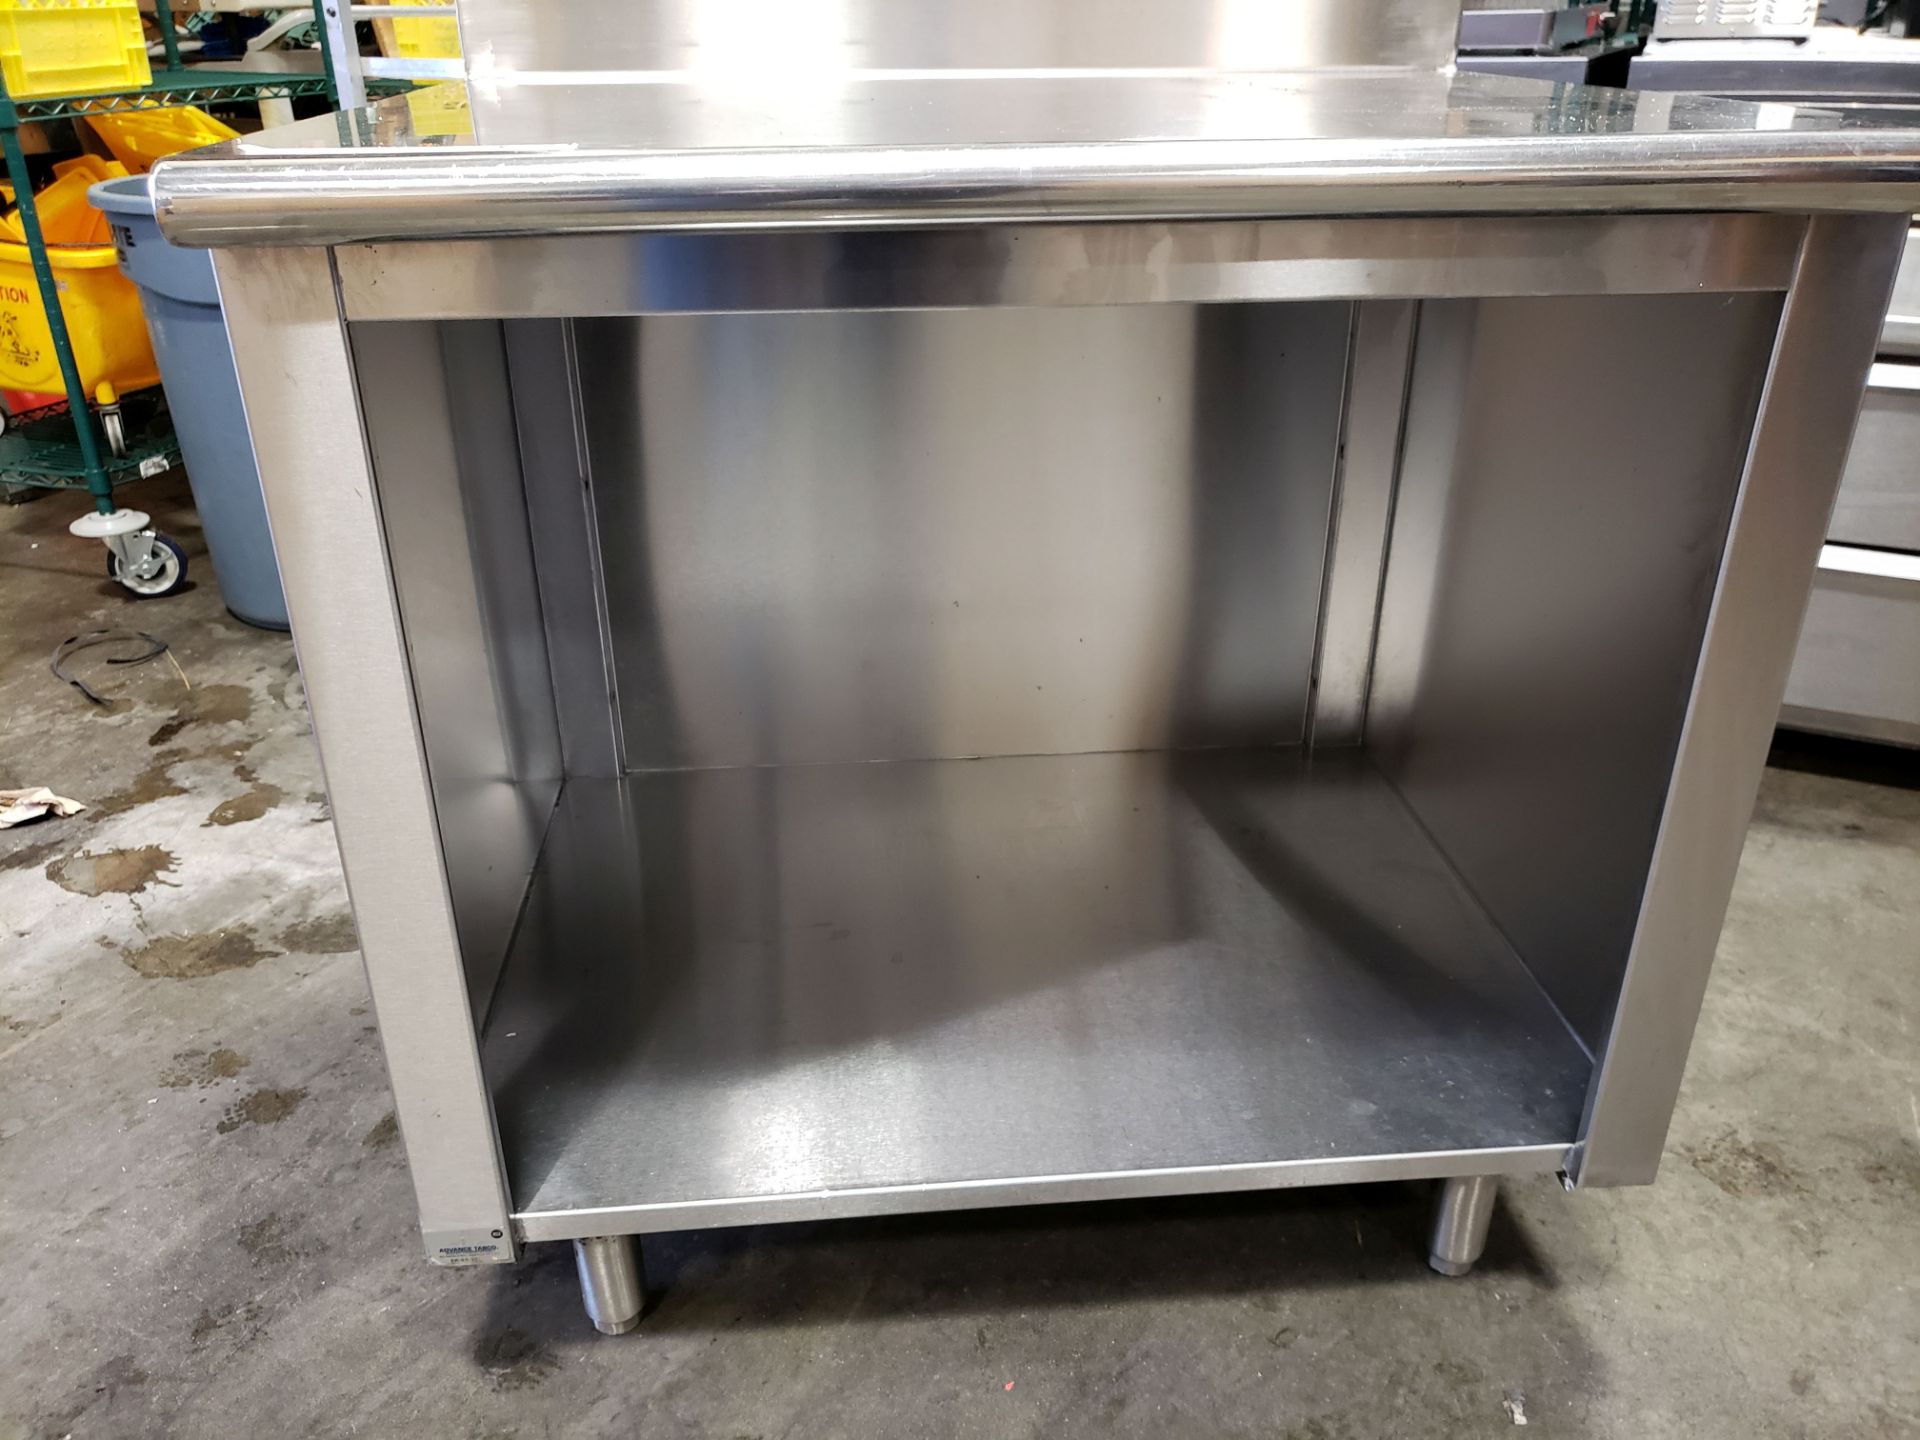 36" x 30" Stainless Cabinet with 5" Back Splash - Image 4 of 5